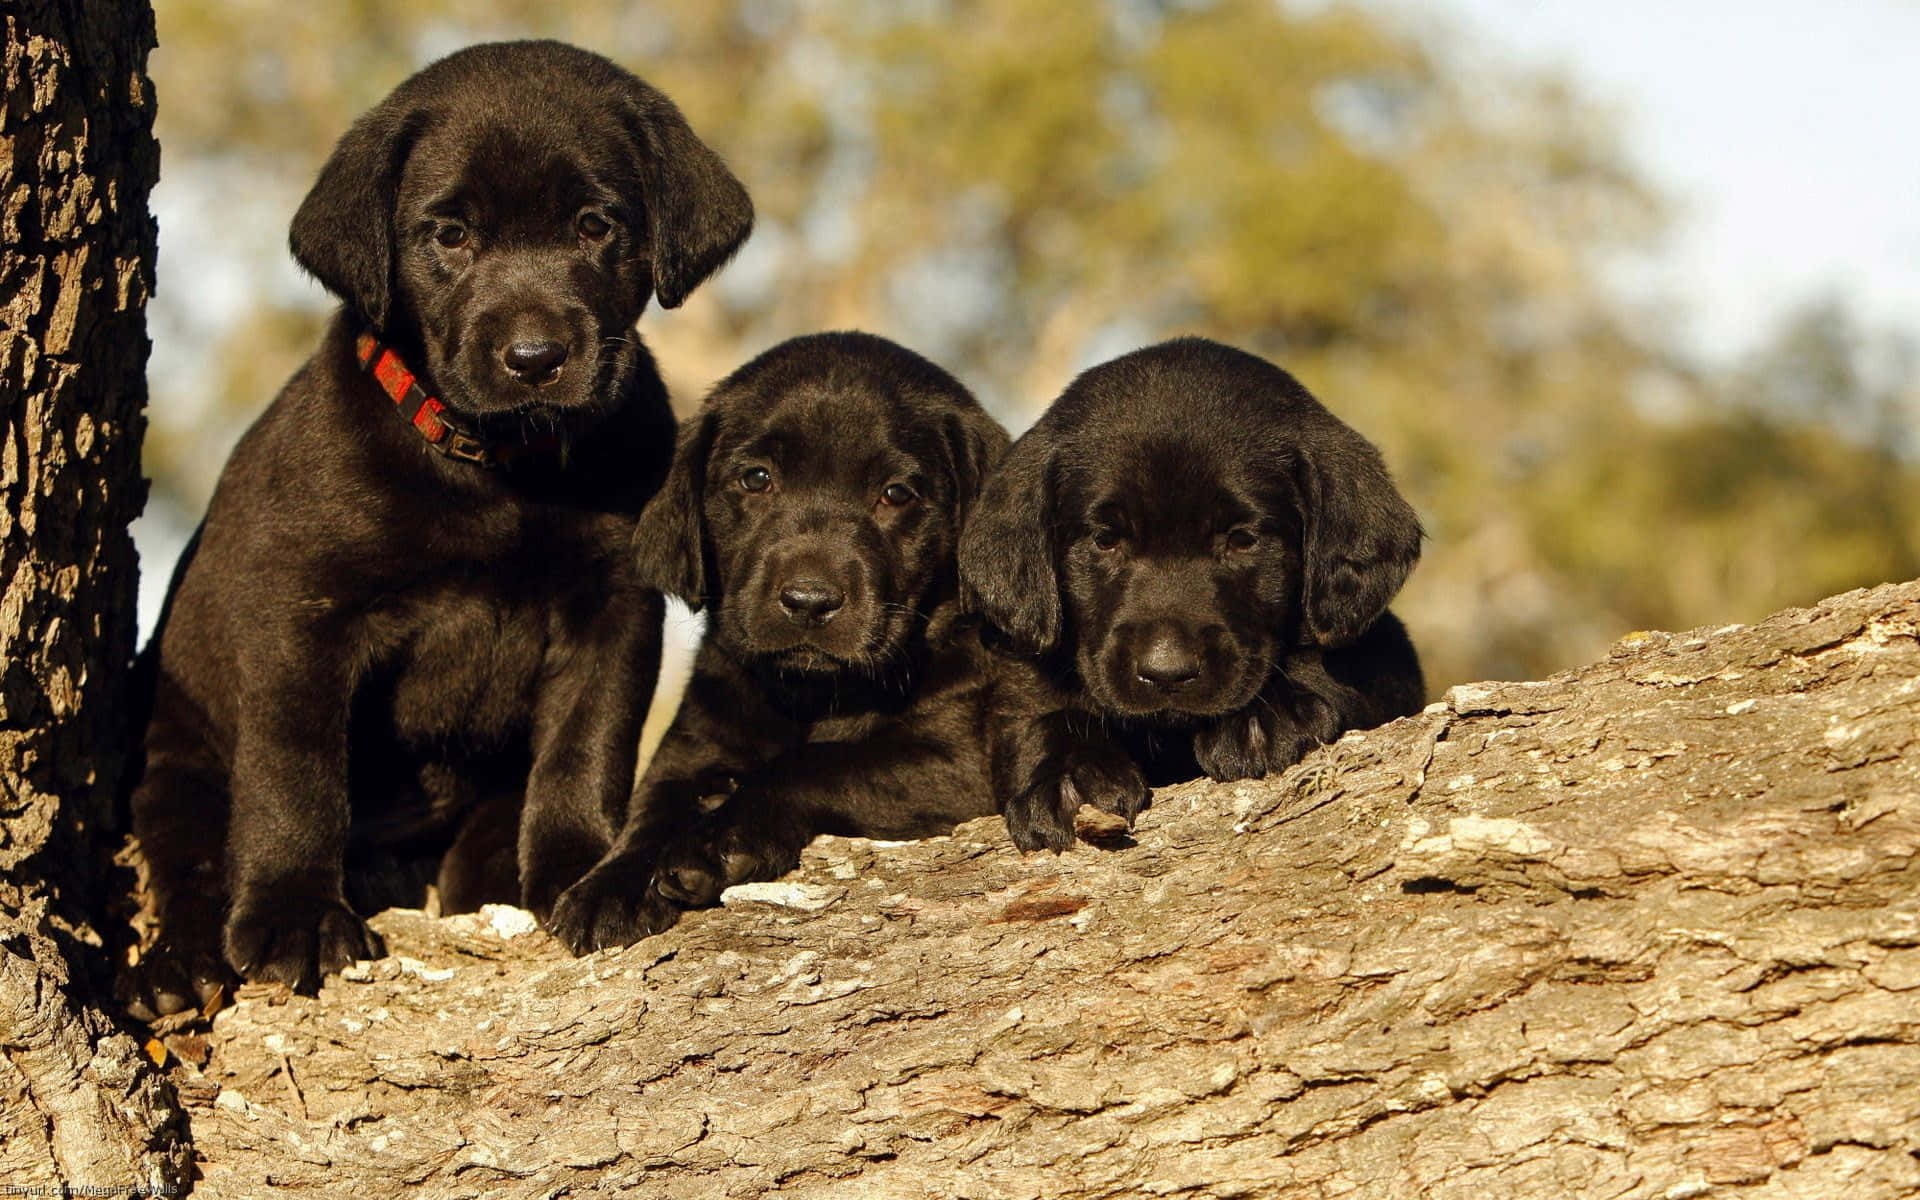 Curious and playful Black Lab puppies exploring their surroundings.